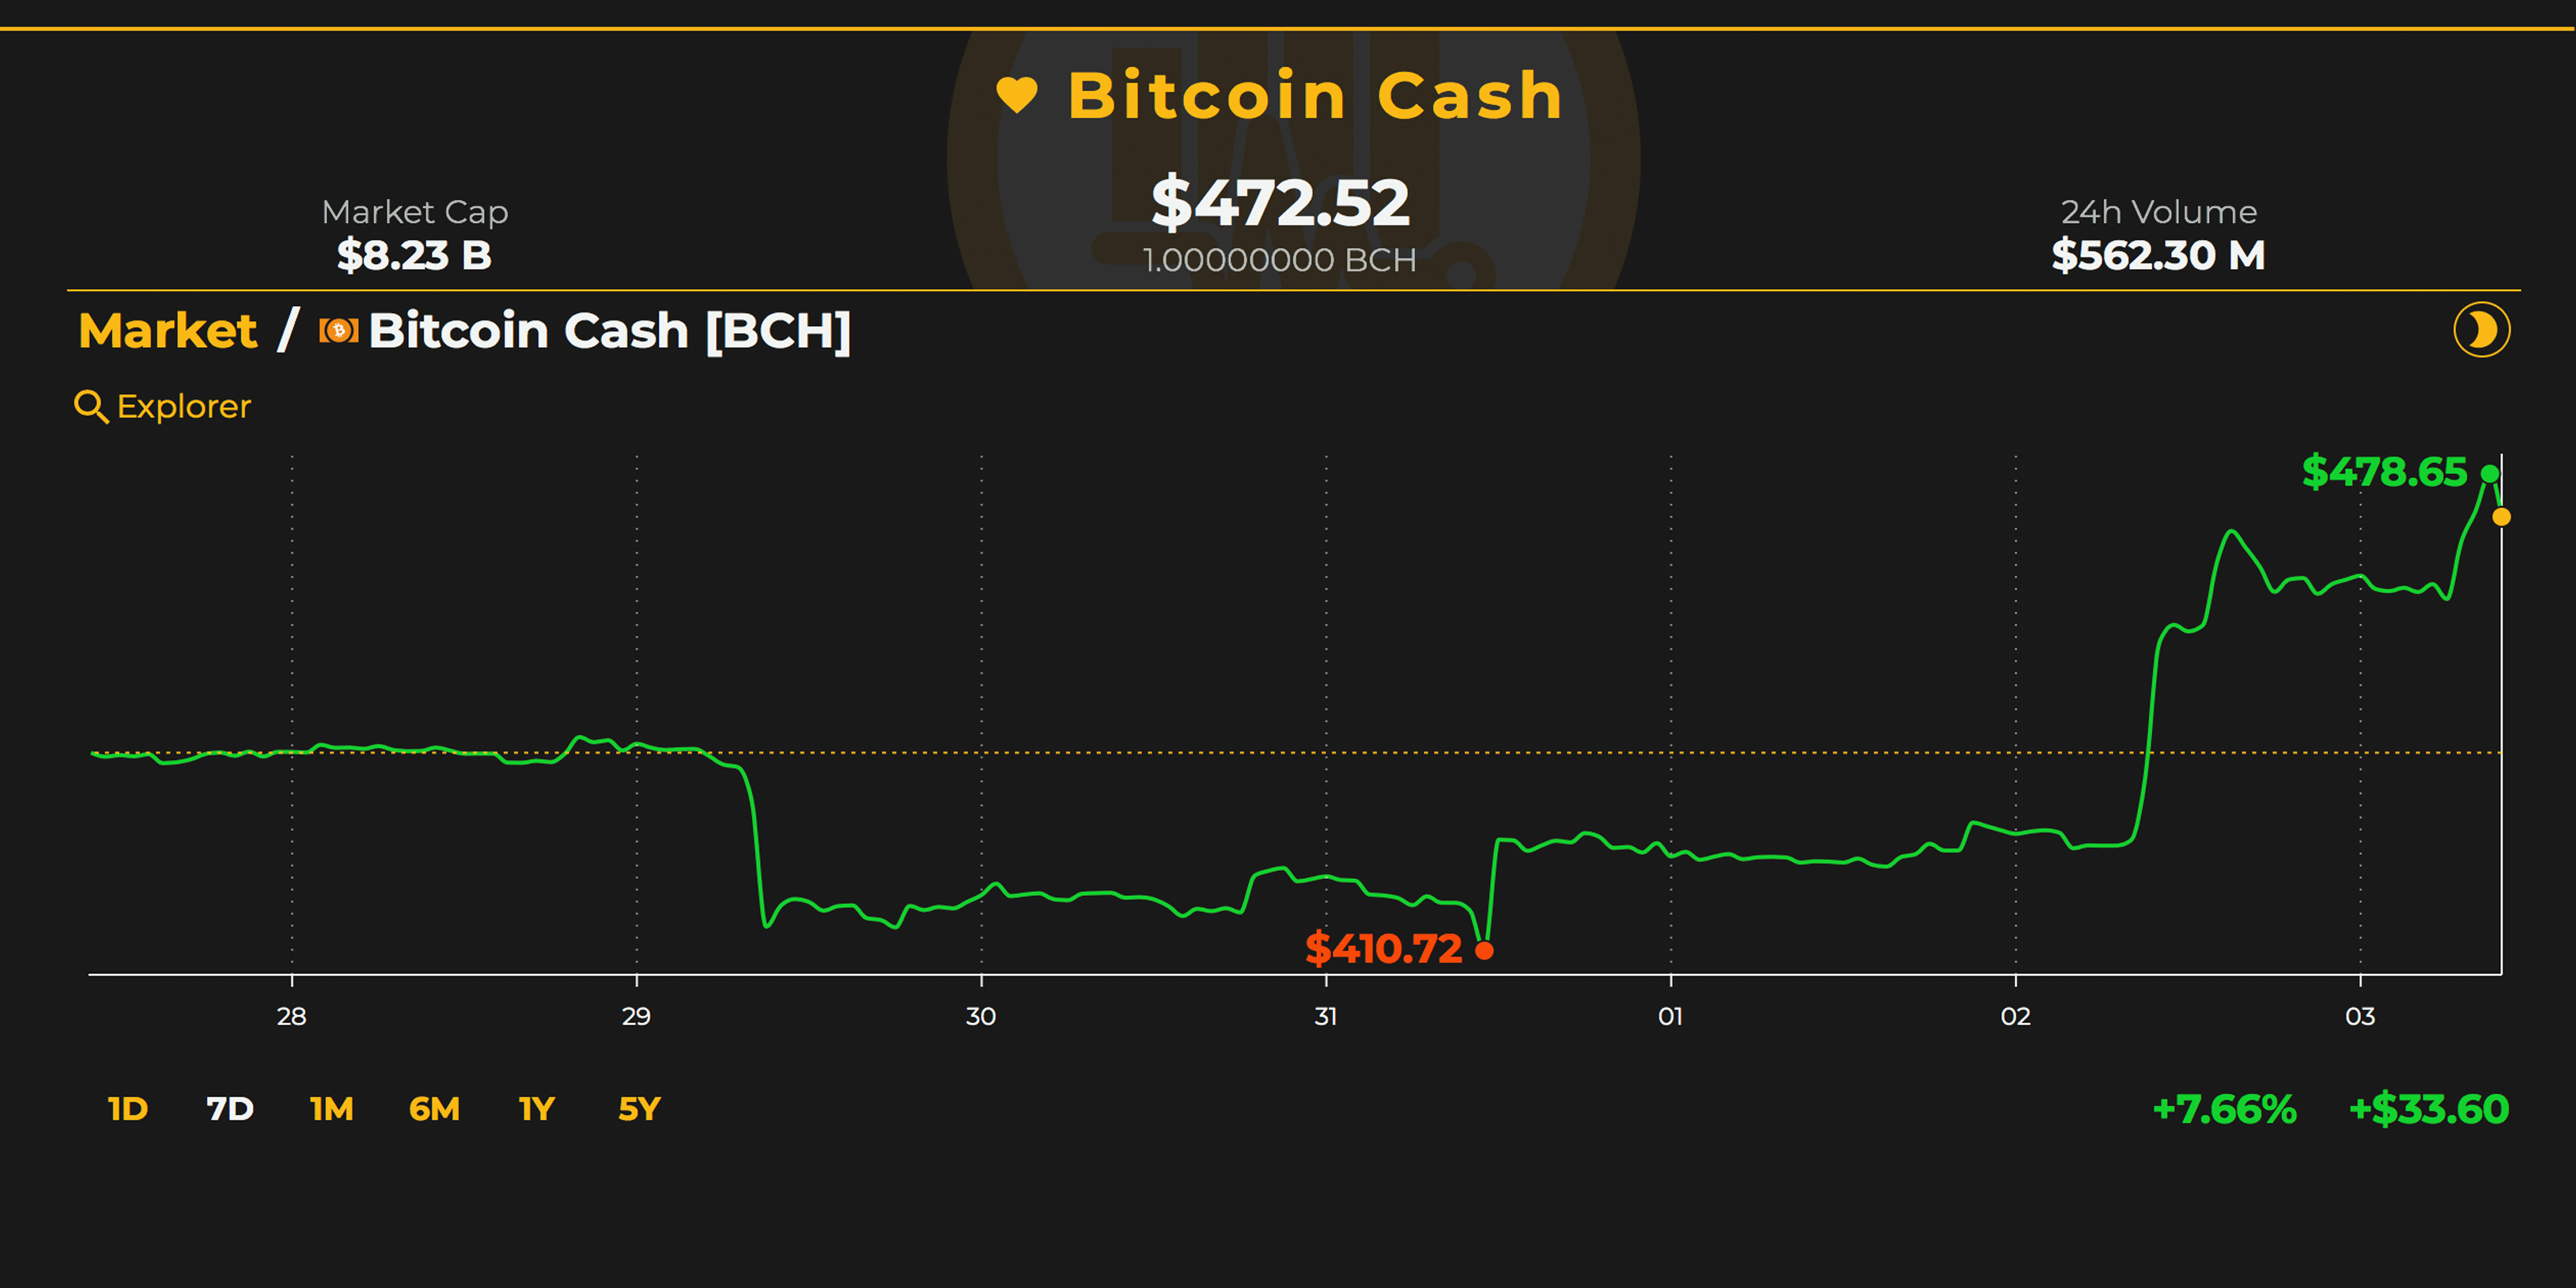 Markets Update: Bitcoin Cash Prices See Steady Gains Over the Last Two Days